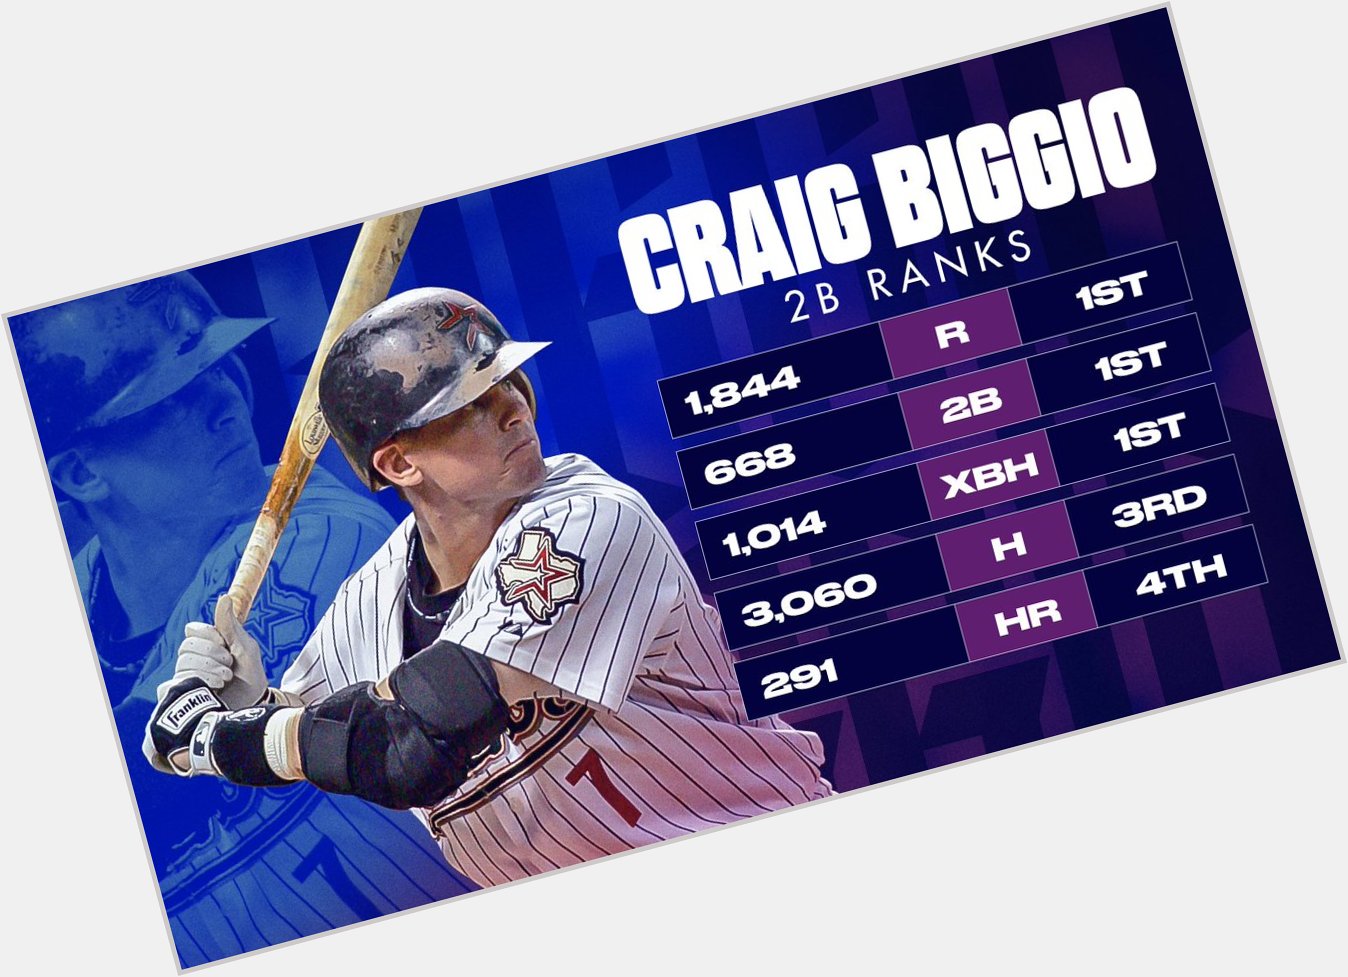 MLB: Happy birthday, Craig Biggio!

The Hall of Famer is one of the best to play 2B. 